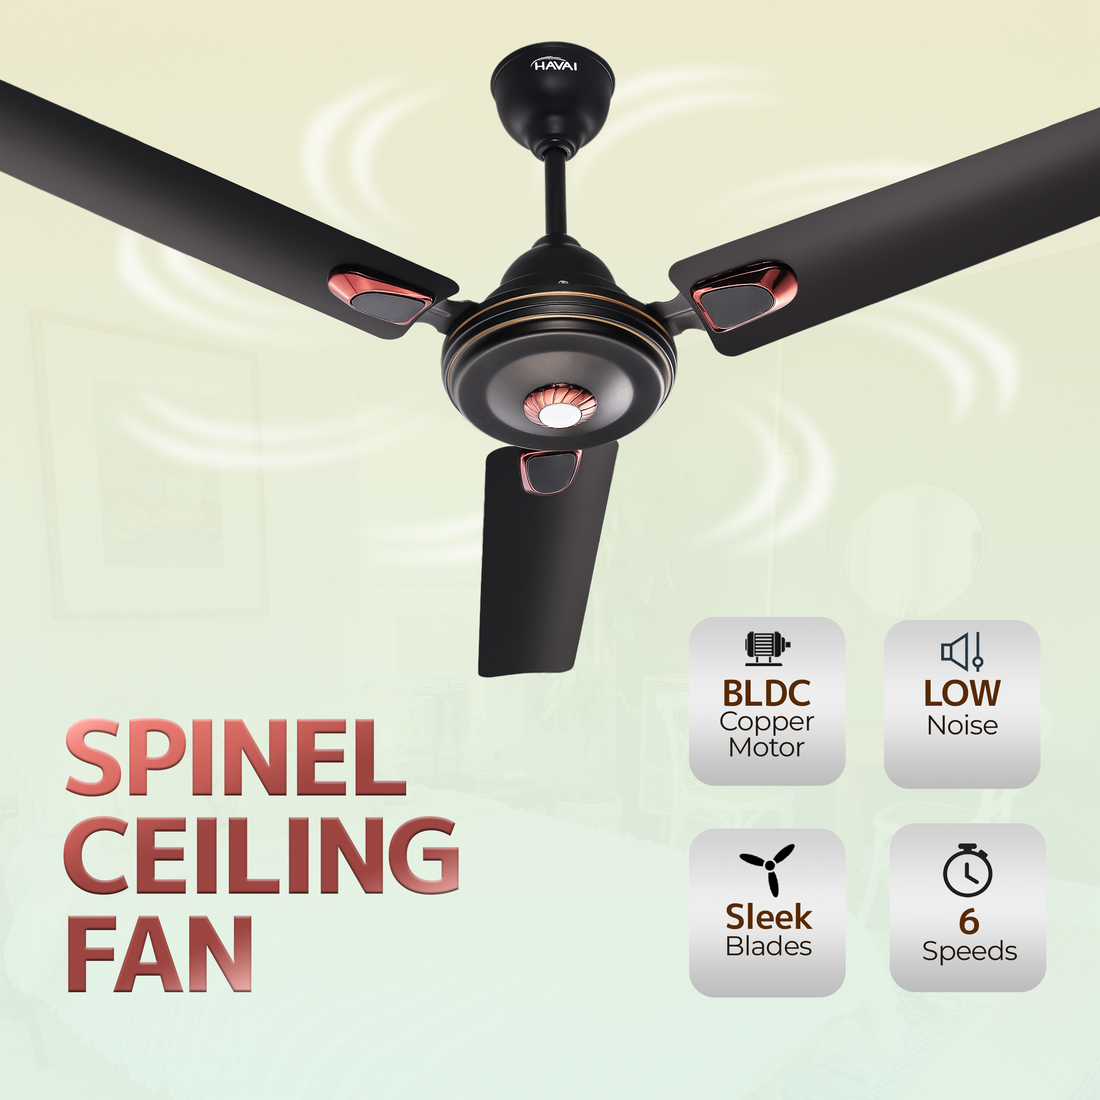 HAVAI Spinel BLDC Ceiling Fan 28W, 1200mm Blade with Remote - Smoky Brown, Leaf Deco